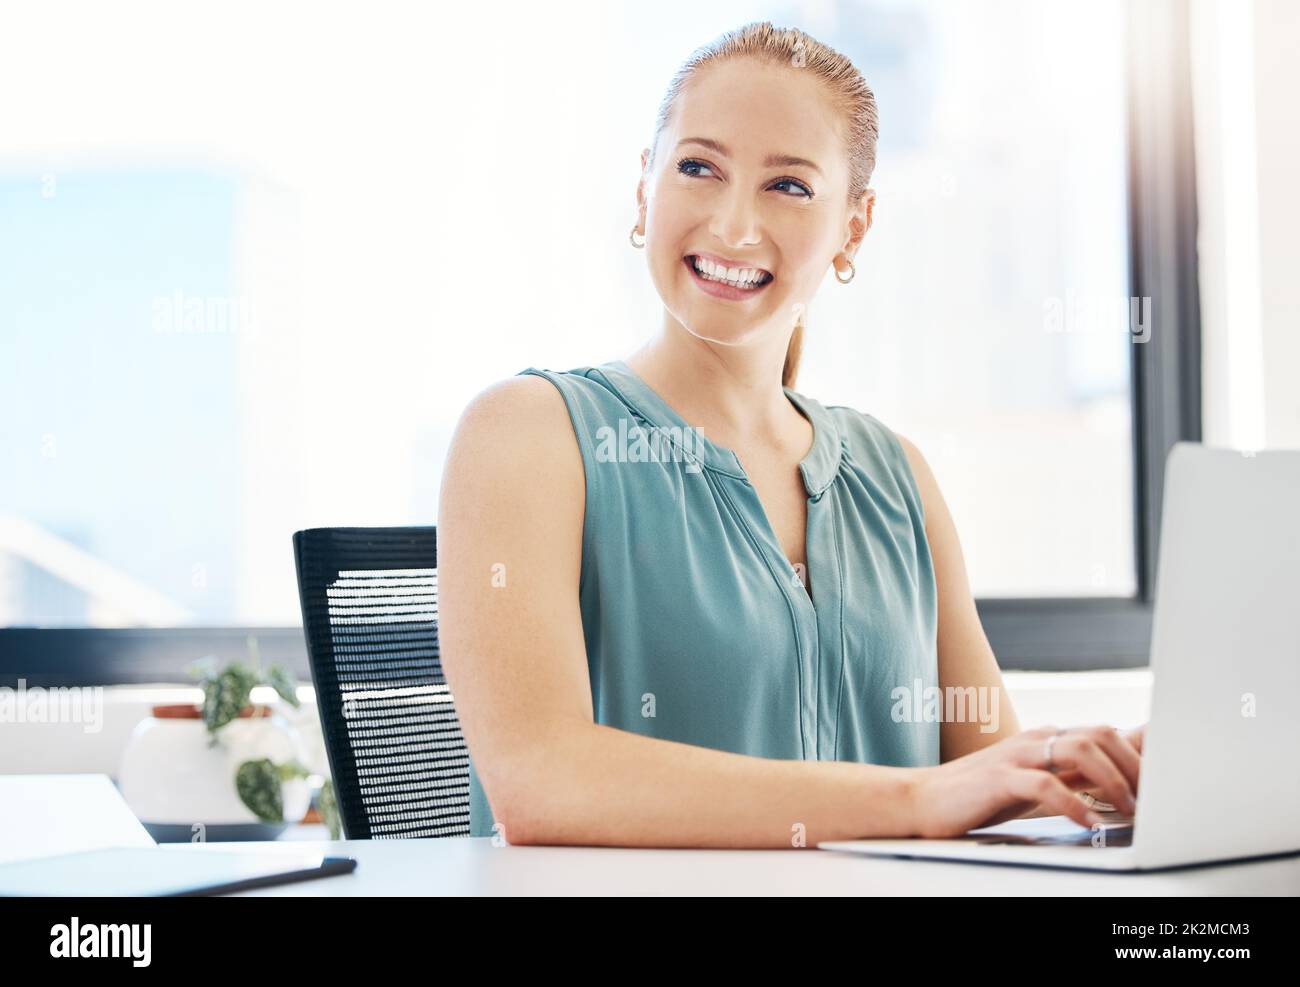 This good mood was sponsored by passion. Shot of an attractive young businesswoman sitting alone in the office and using her laptop. Stock Photo